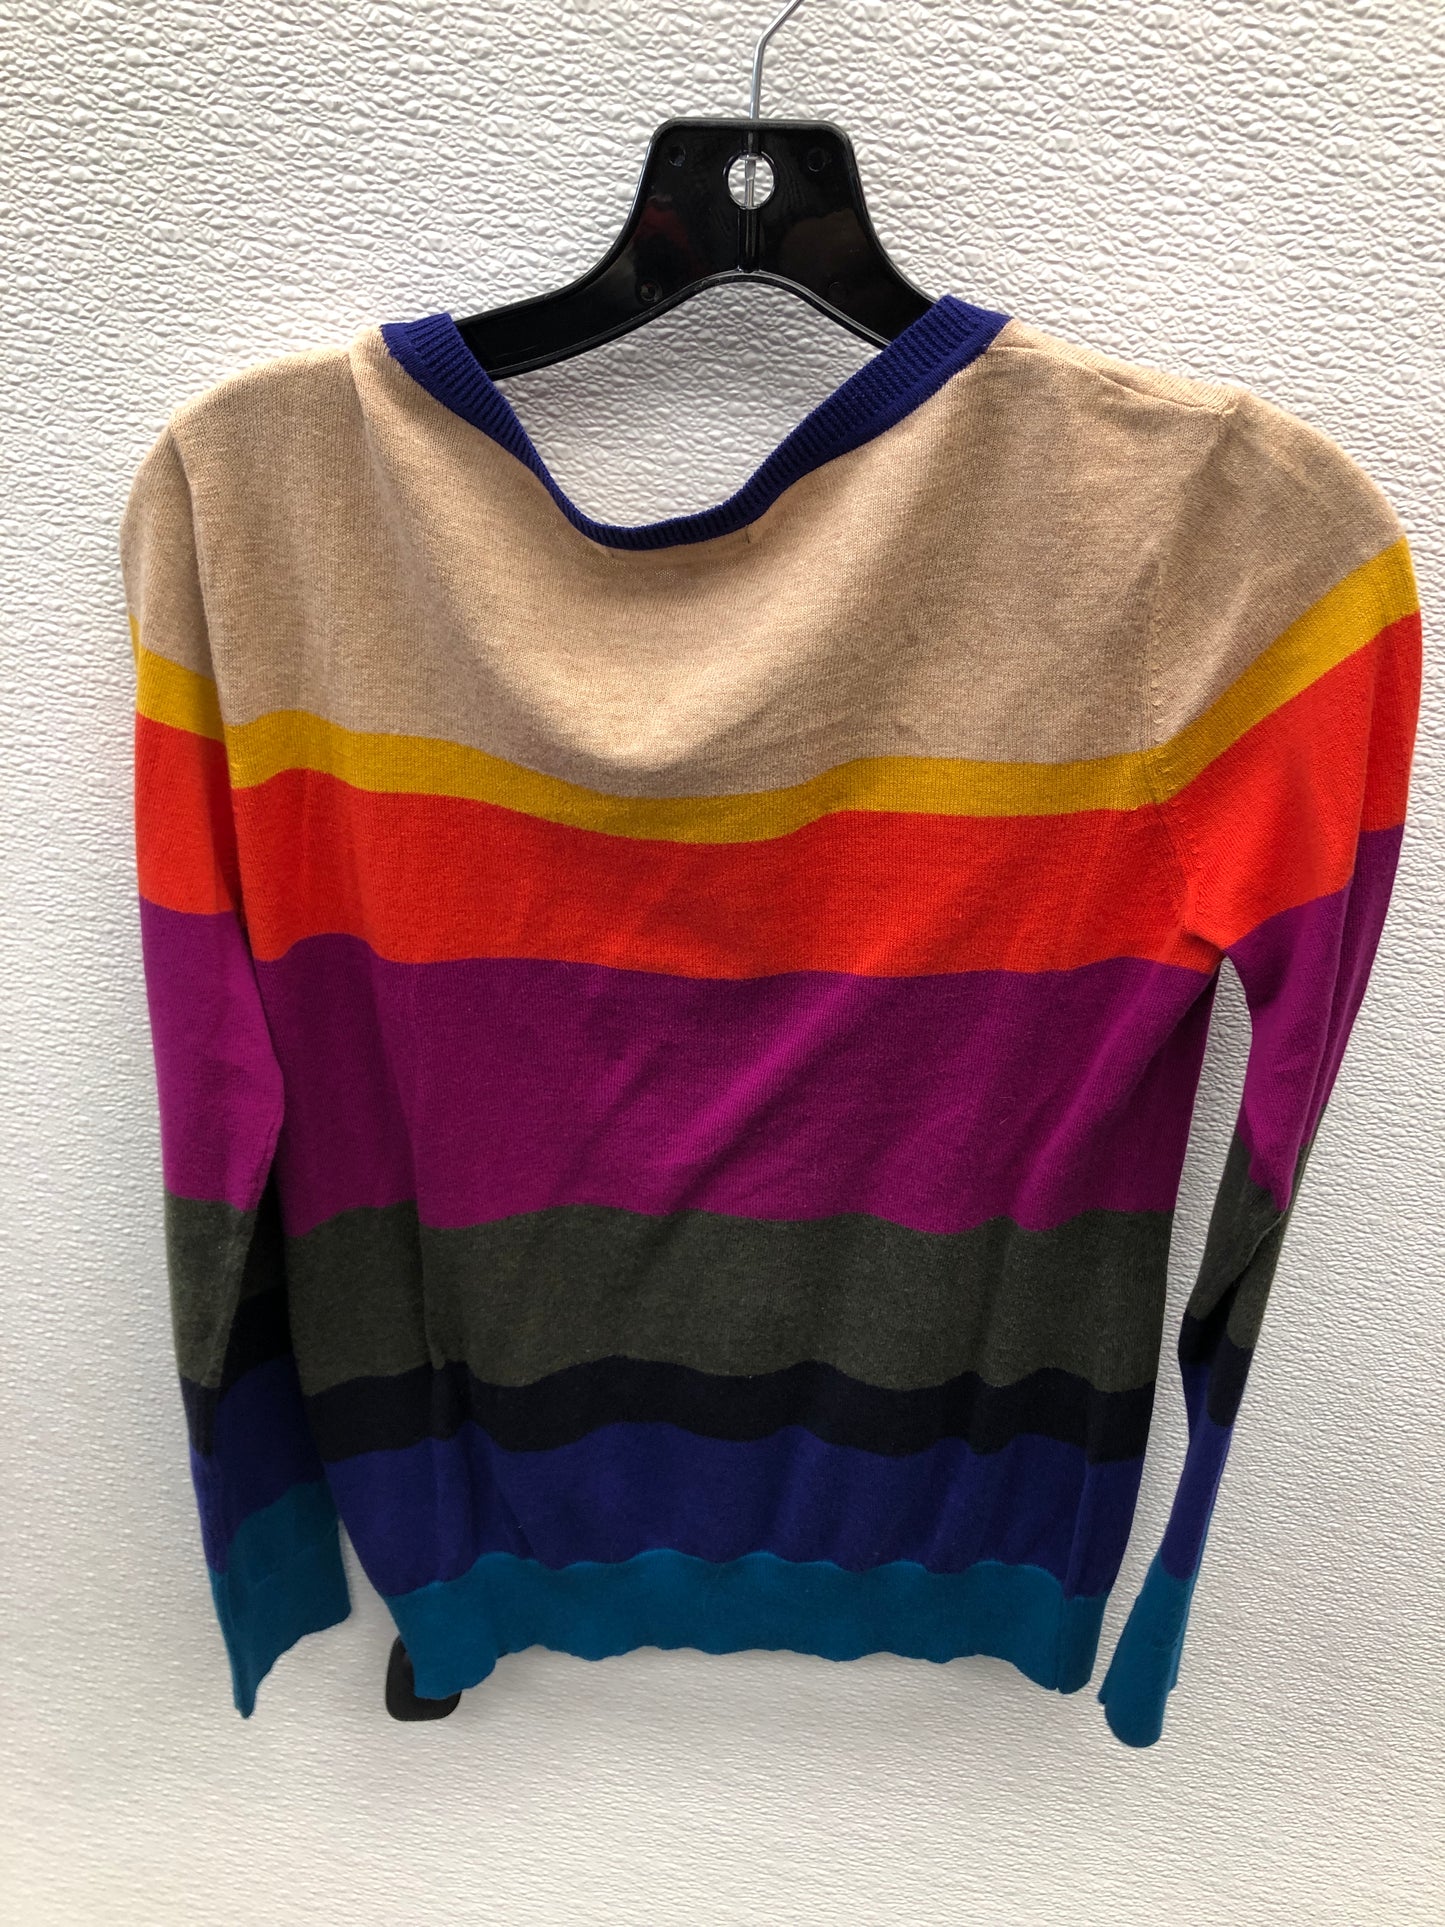 Top Long Sleeve By Gap O  Size: M